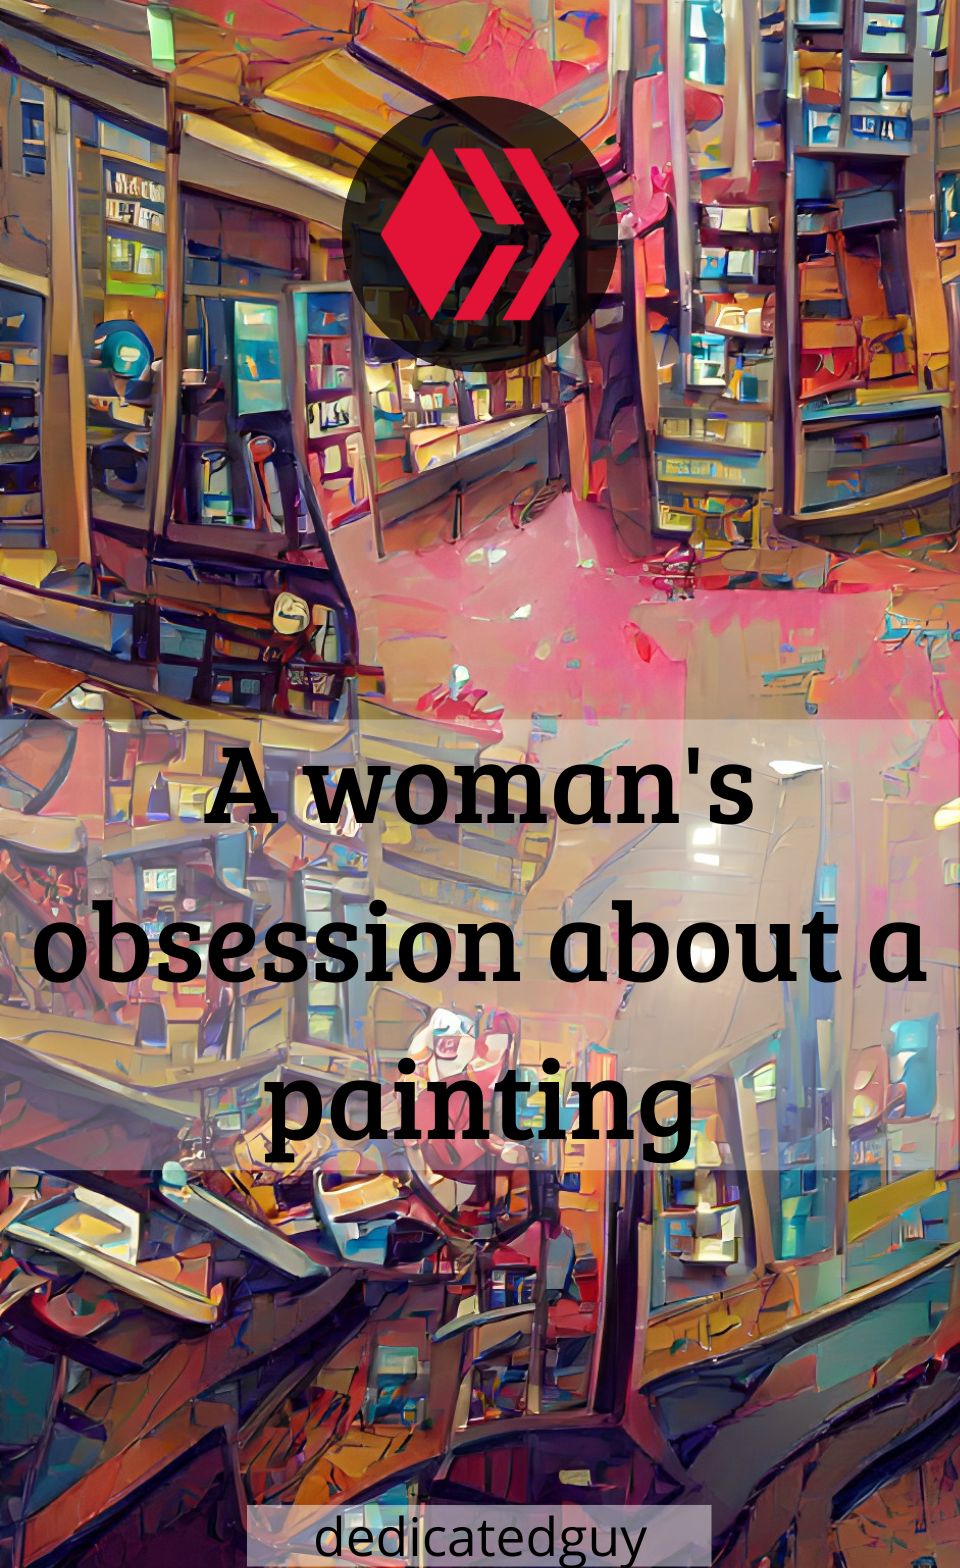 hive dedicatedguy story fiction historia ficcion art arte A woman's obsession about a painting.jpg